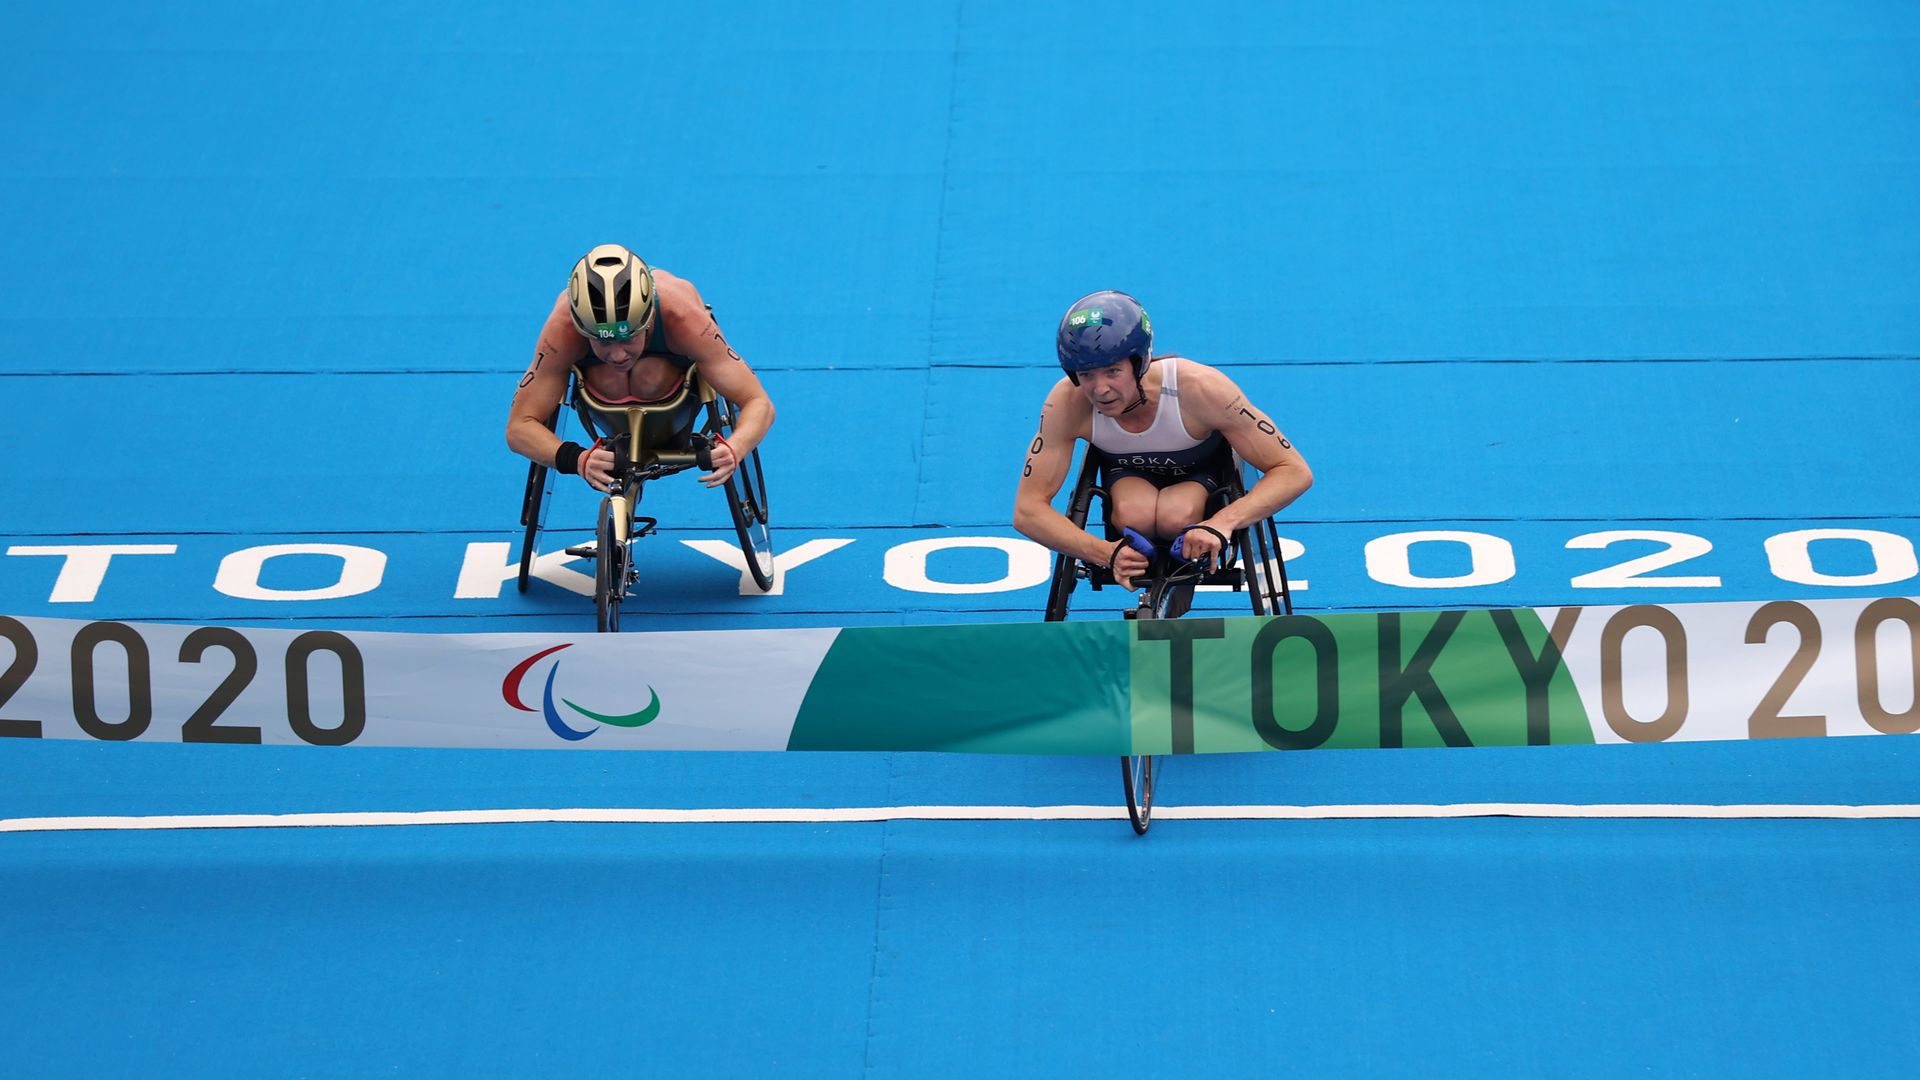 USA gold medalist Kendall Gretsch (R) and silver medalist Lauren Parker of Team Australia at the women's PTWC Triathlon on day 5 of the Tokyo 2020 Paralympic Games at Odaiba Marine Park on August 29